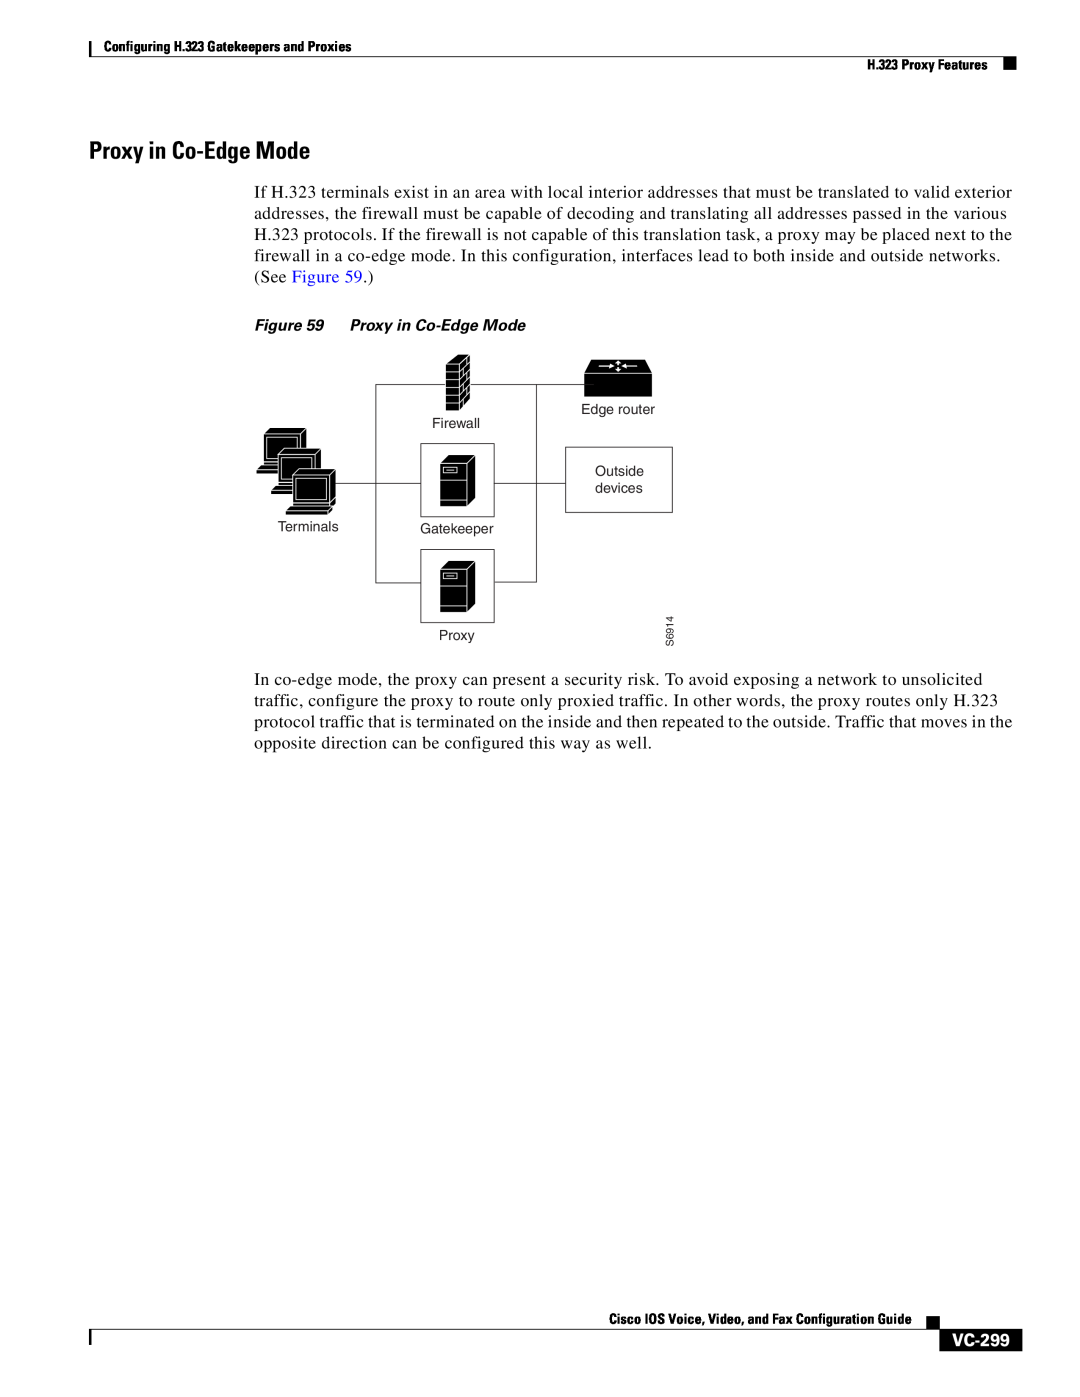 Cisco Systems VC-289 manual Proxy in Co-EdgeMode, See Figure, VC-299 